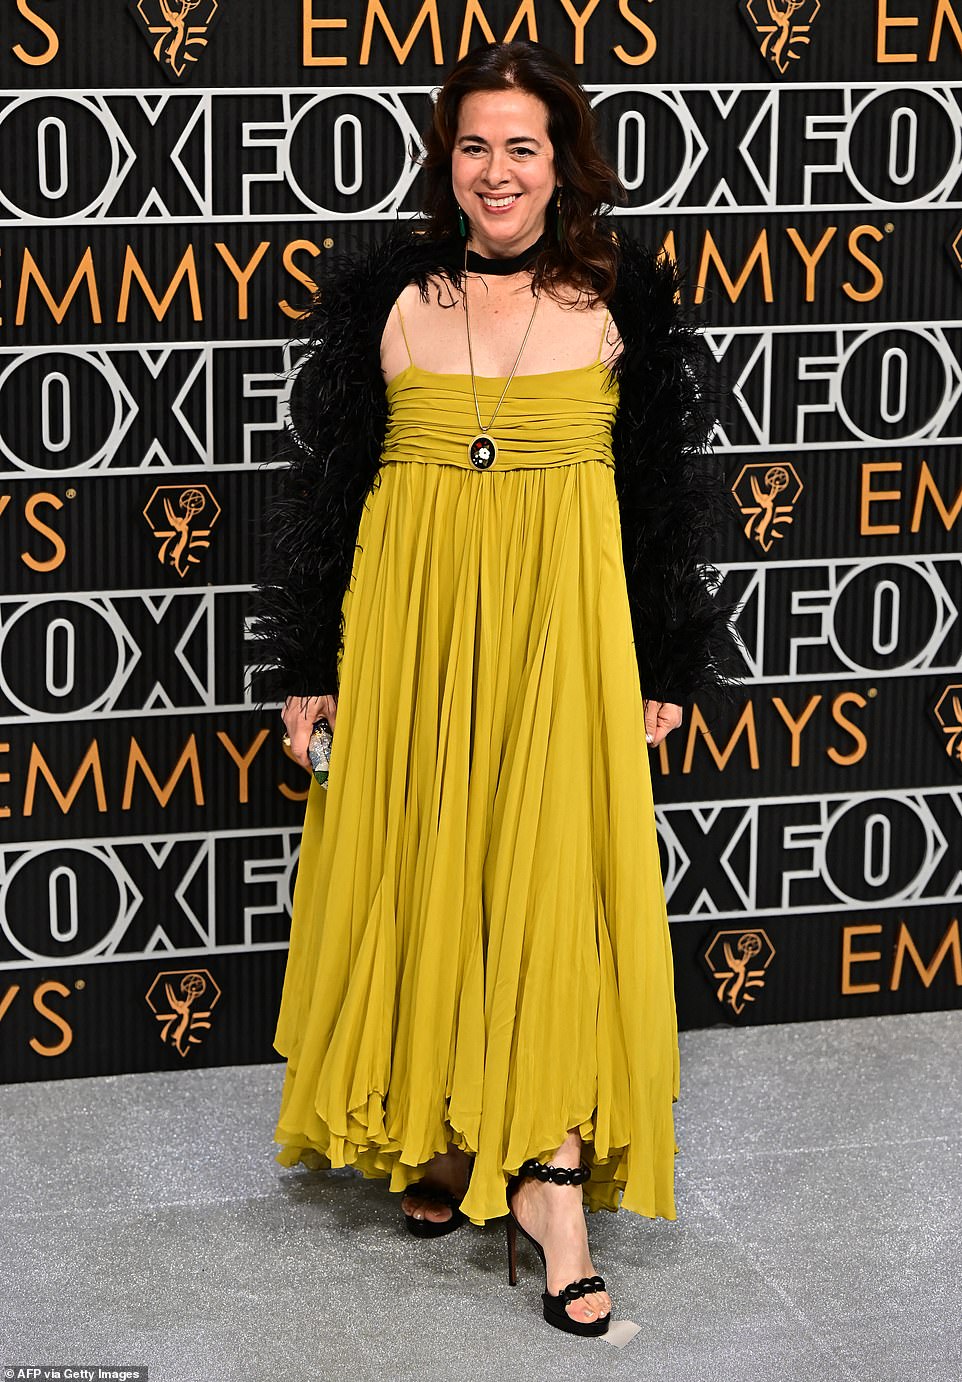 Poor color choice seemed to be something of a theme for the evening, as proven by writer Neena Beber, whose baggy mustard-colored frock was one of the many fashion fails of the night